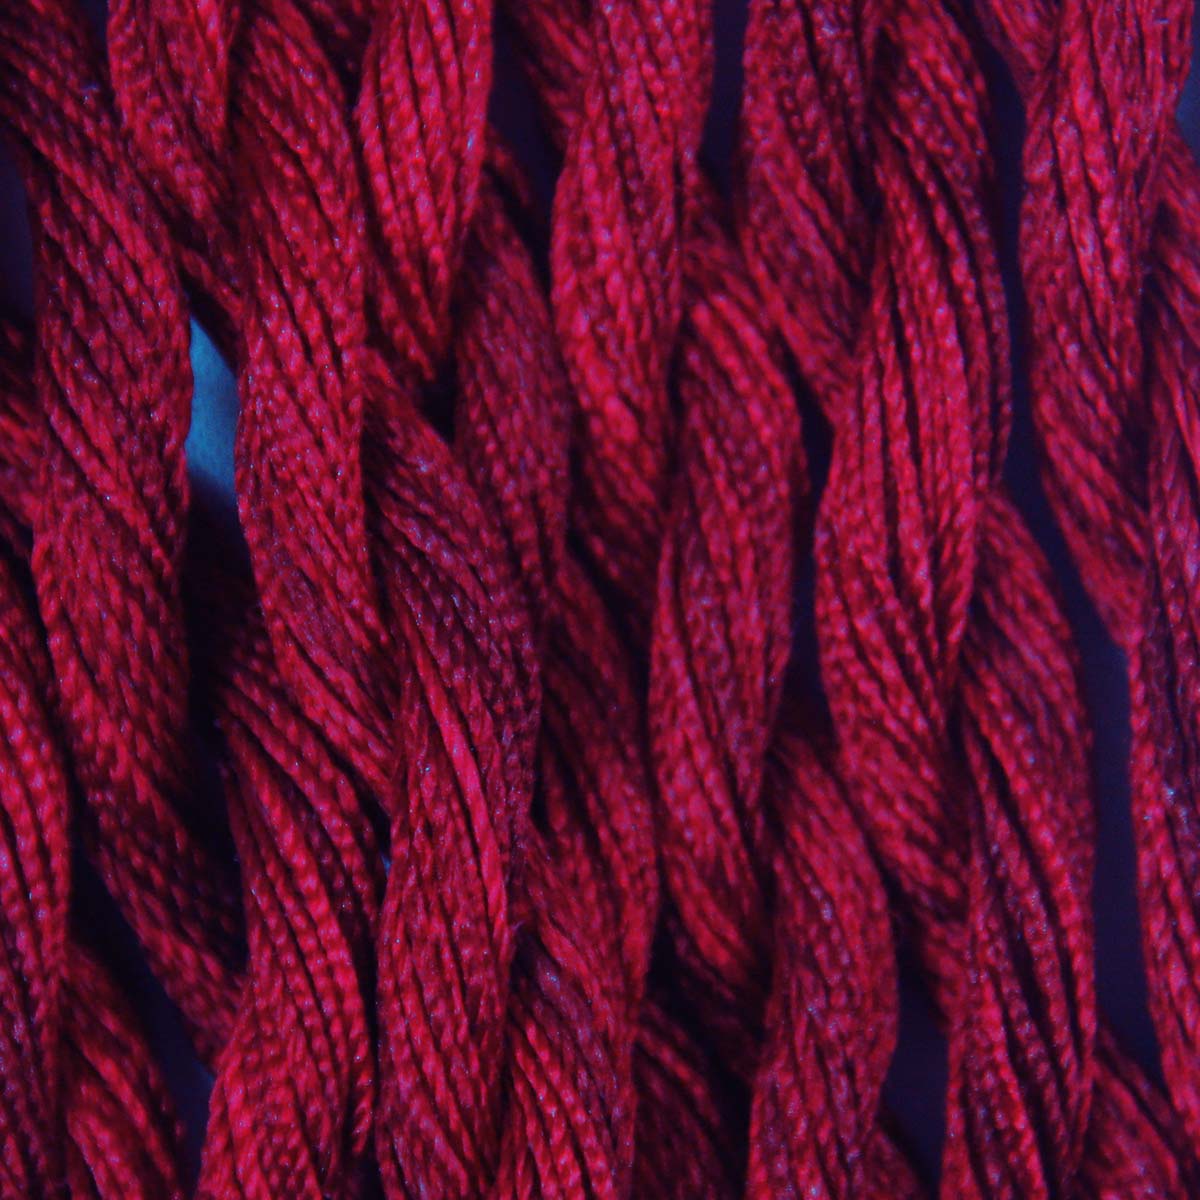 www.colourstreams.com.au Colour Streams Hand Dyed Silk Threads Silken Strands Ophir Exotic Lights Aurora Slow Stitch Embroidery Textile Arts Fibre DL 57 Rouge Reds